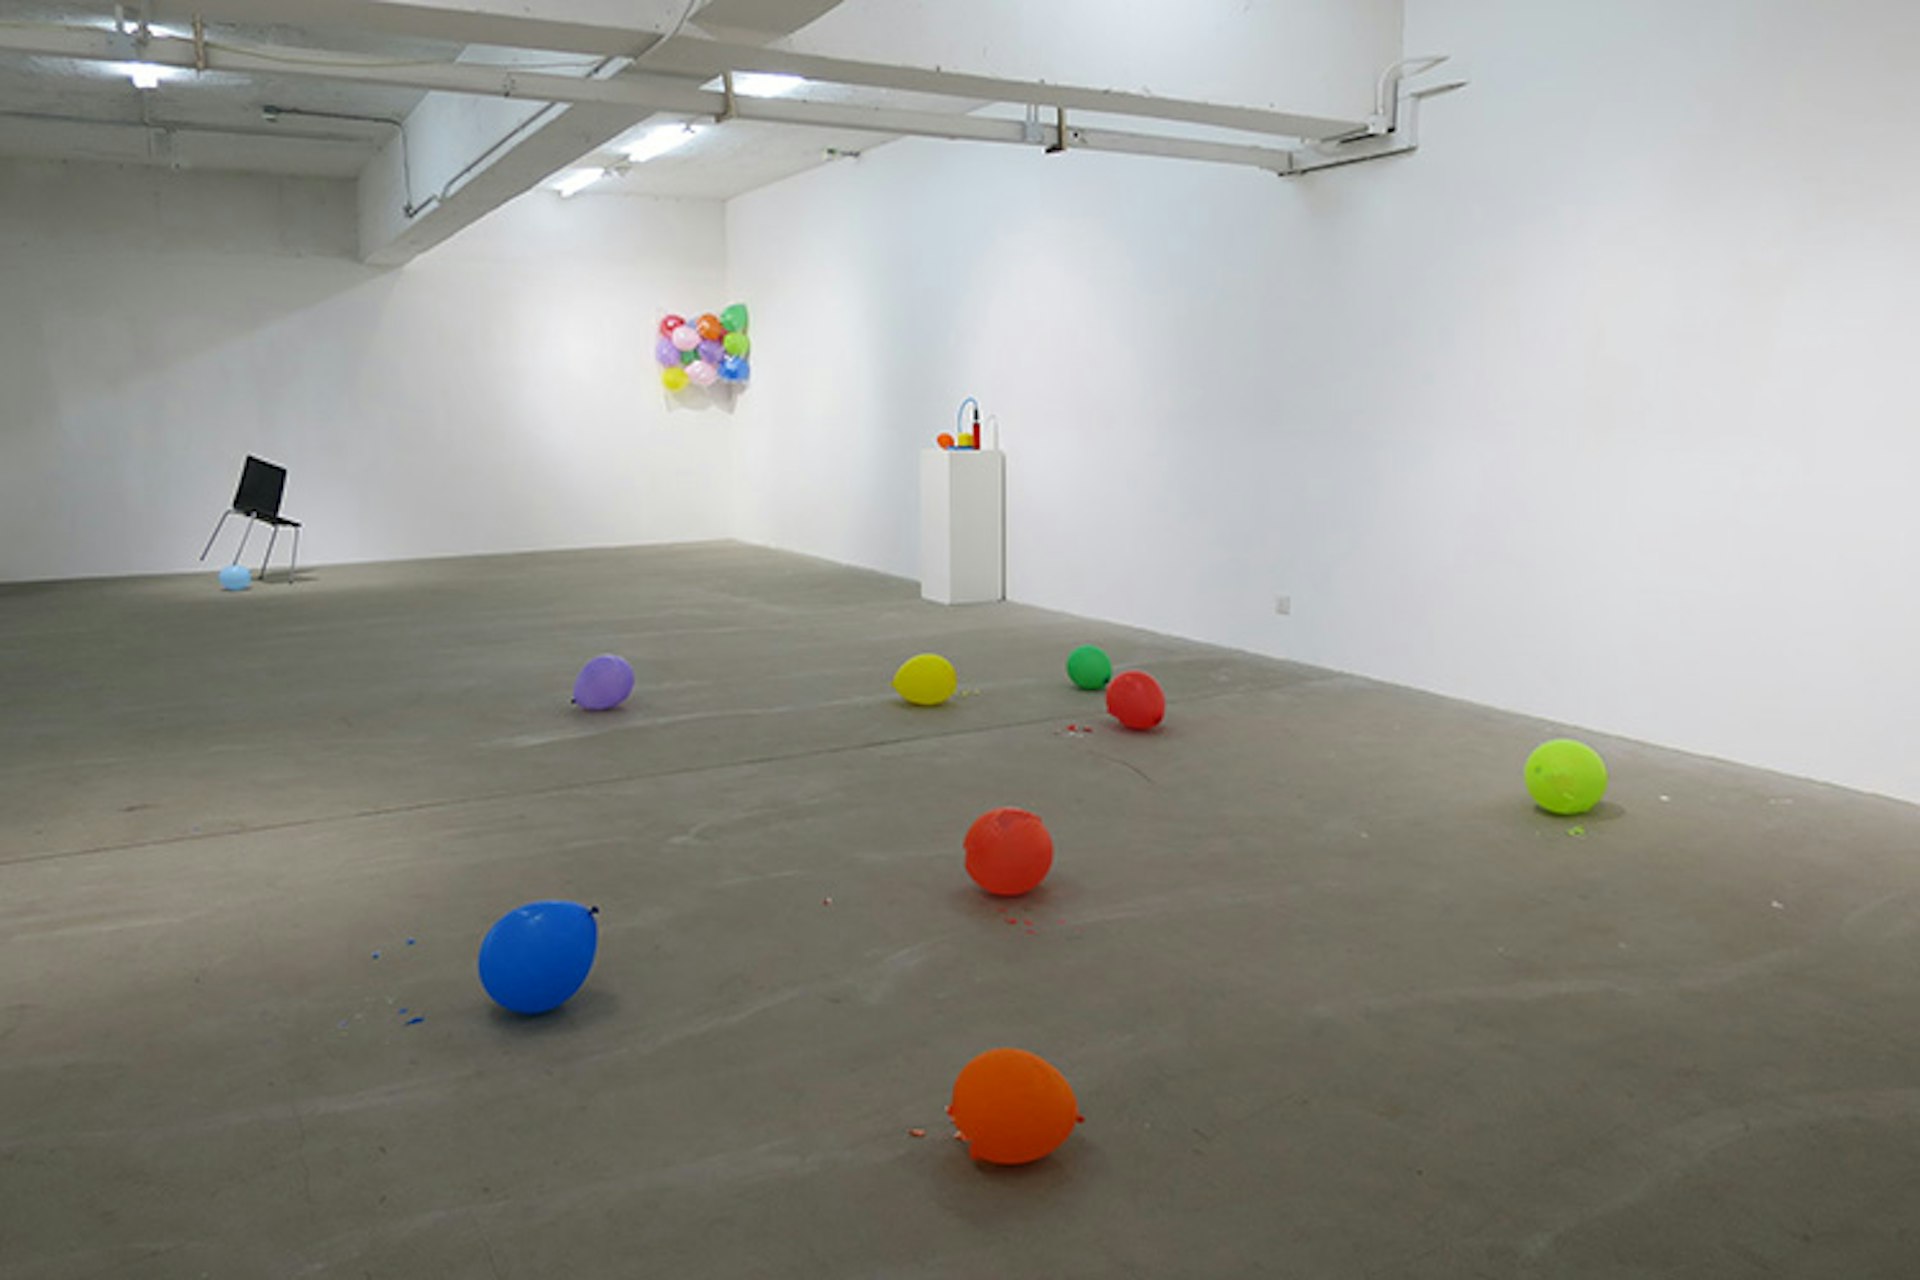 Exhibit by artist Mak Ying Tung at Gallery Exit. Image by Megan Eaves / Lonely Planet